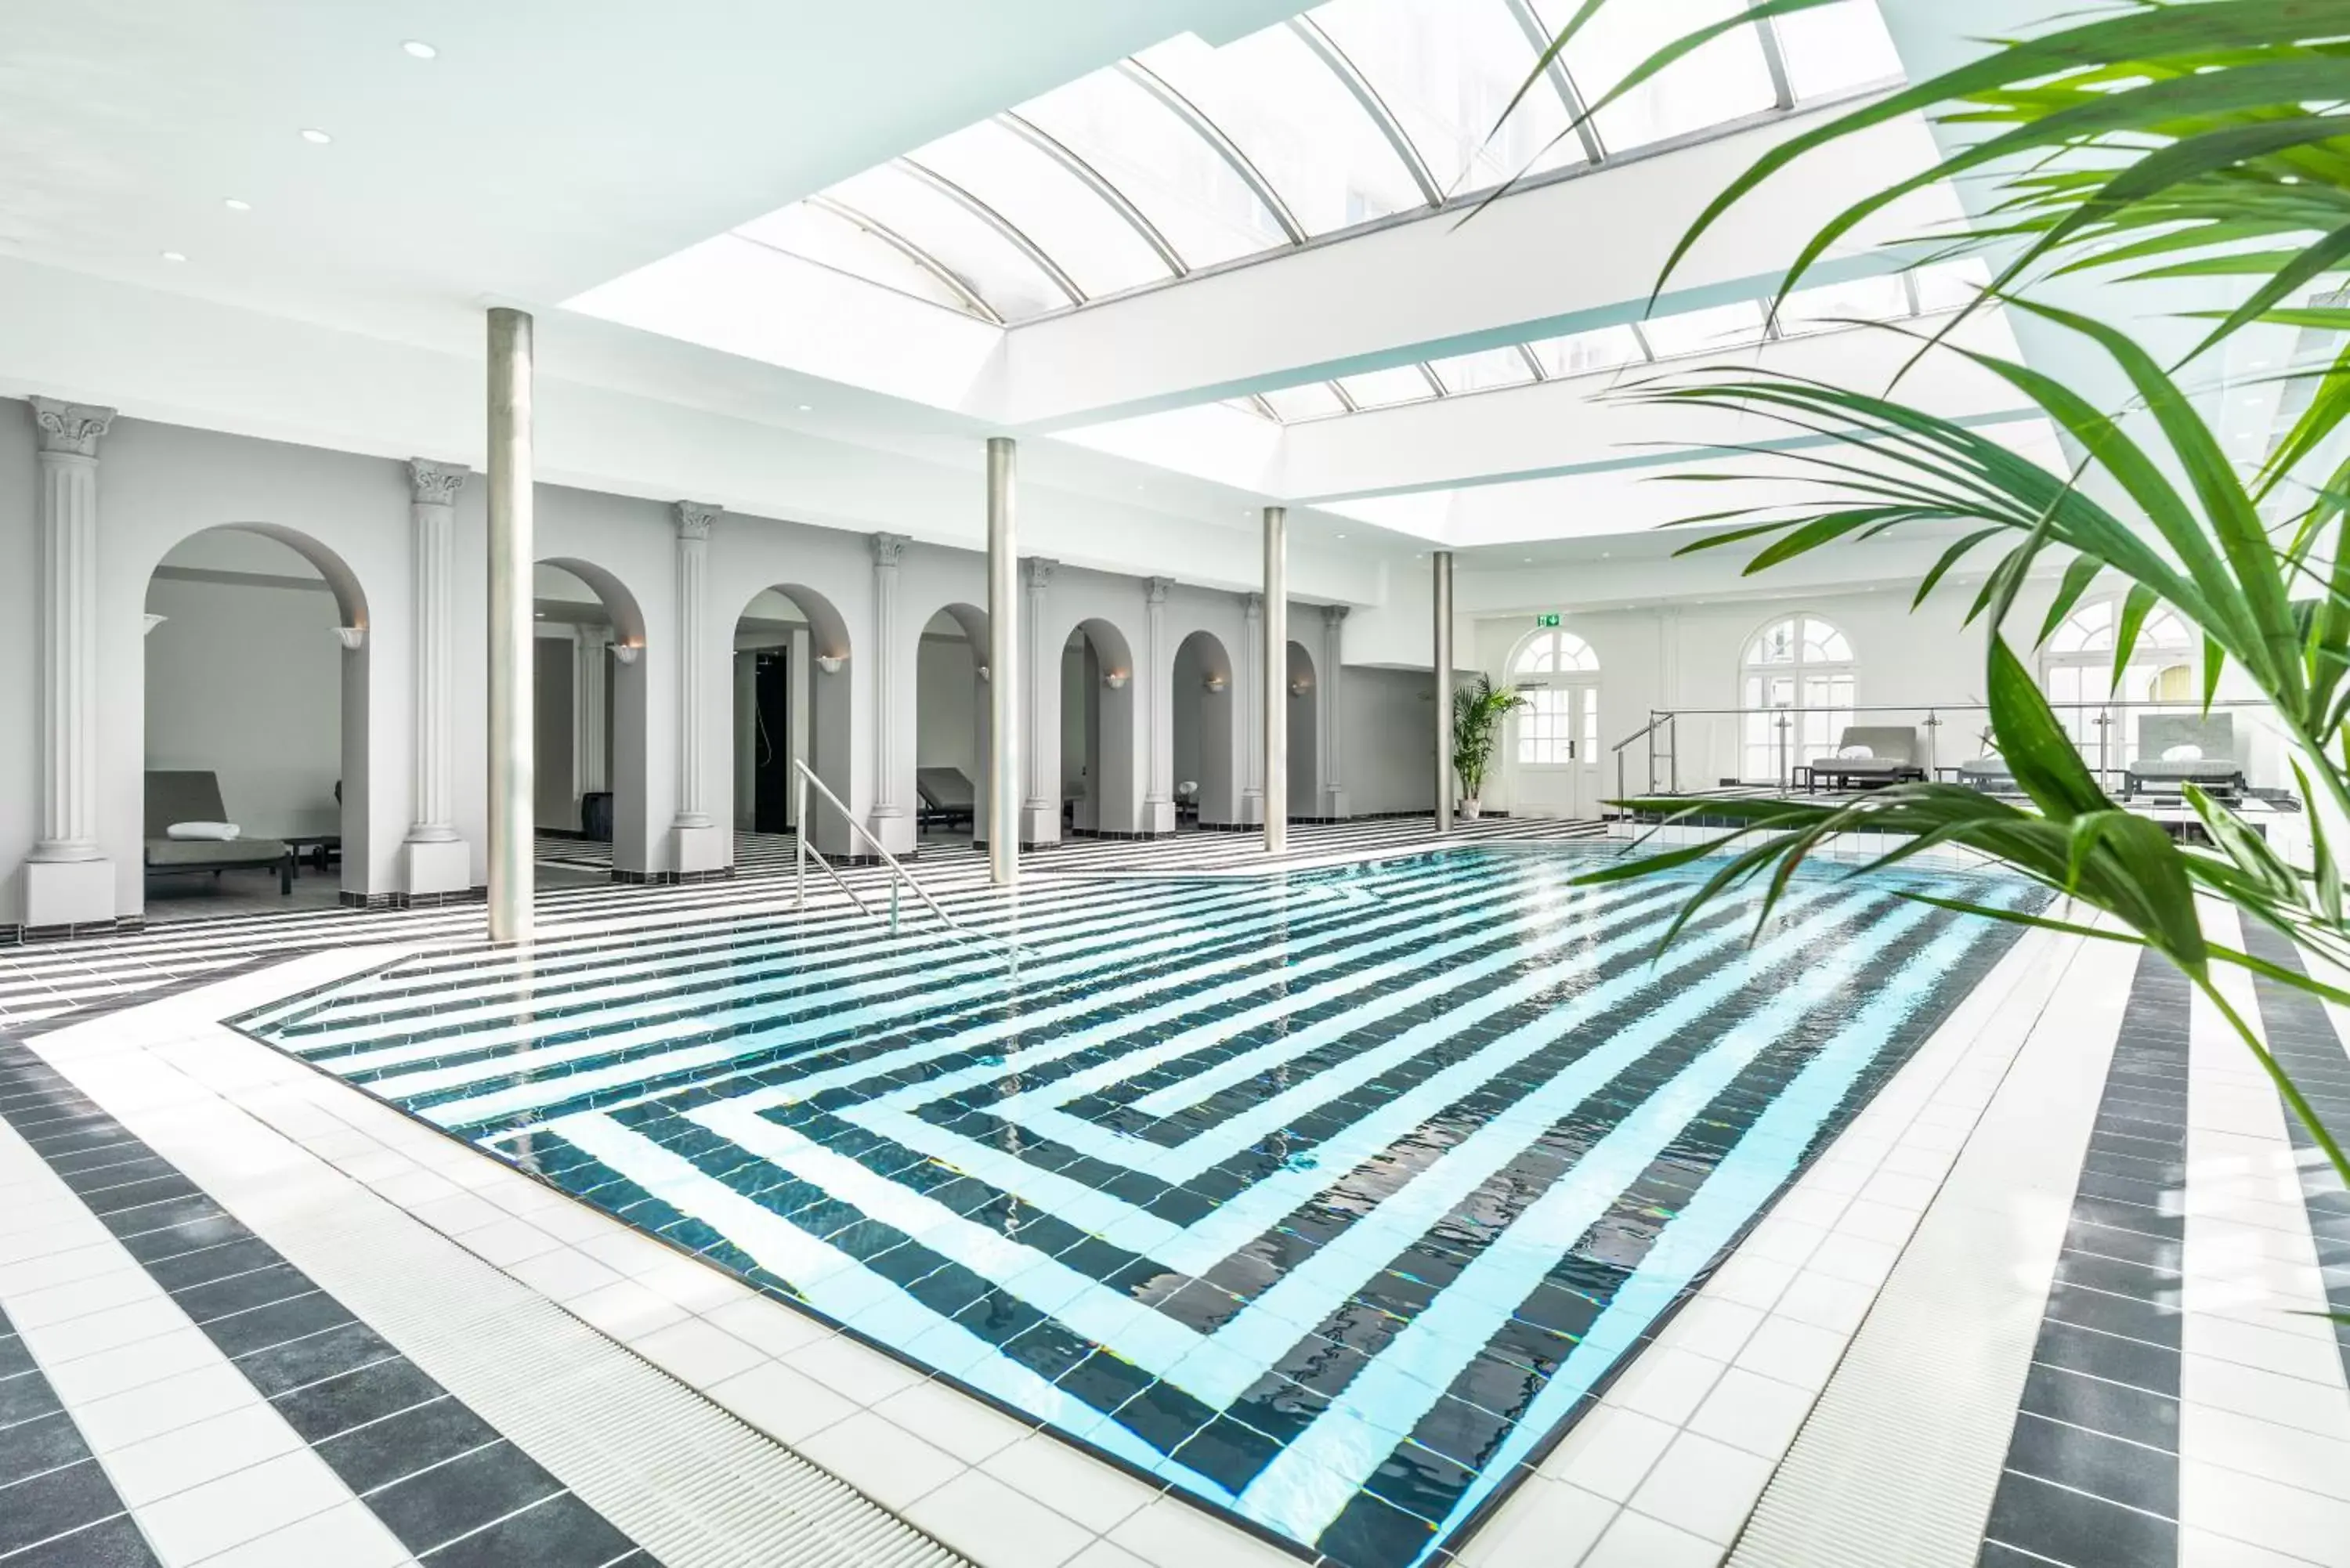 Spa and wellness centre/facilities in Strandhotel Ahlbeck